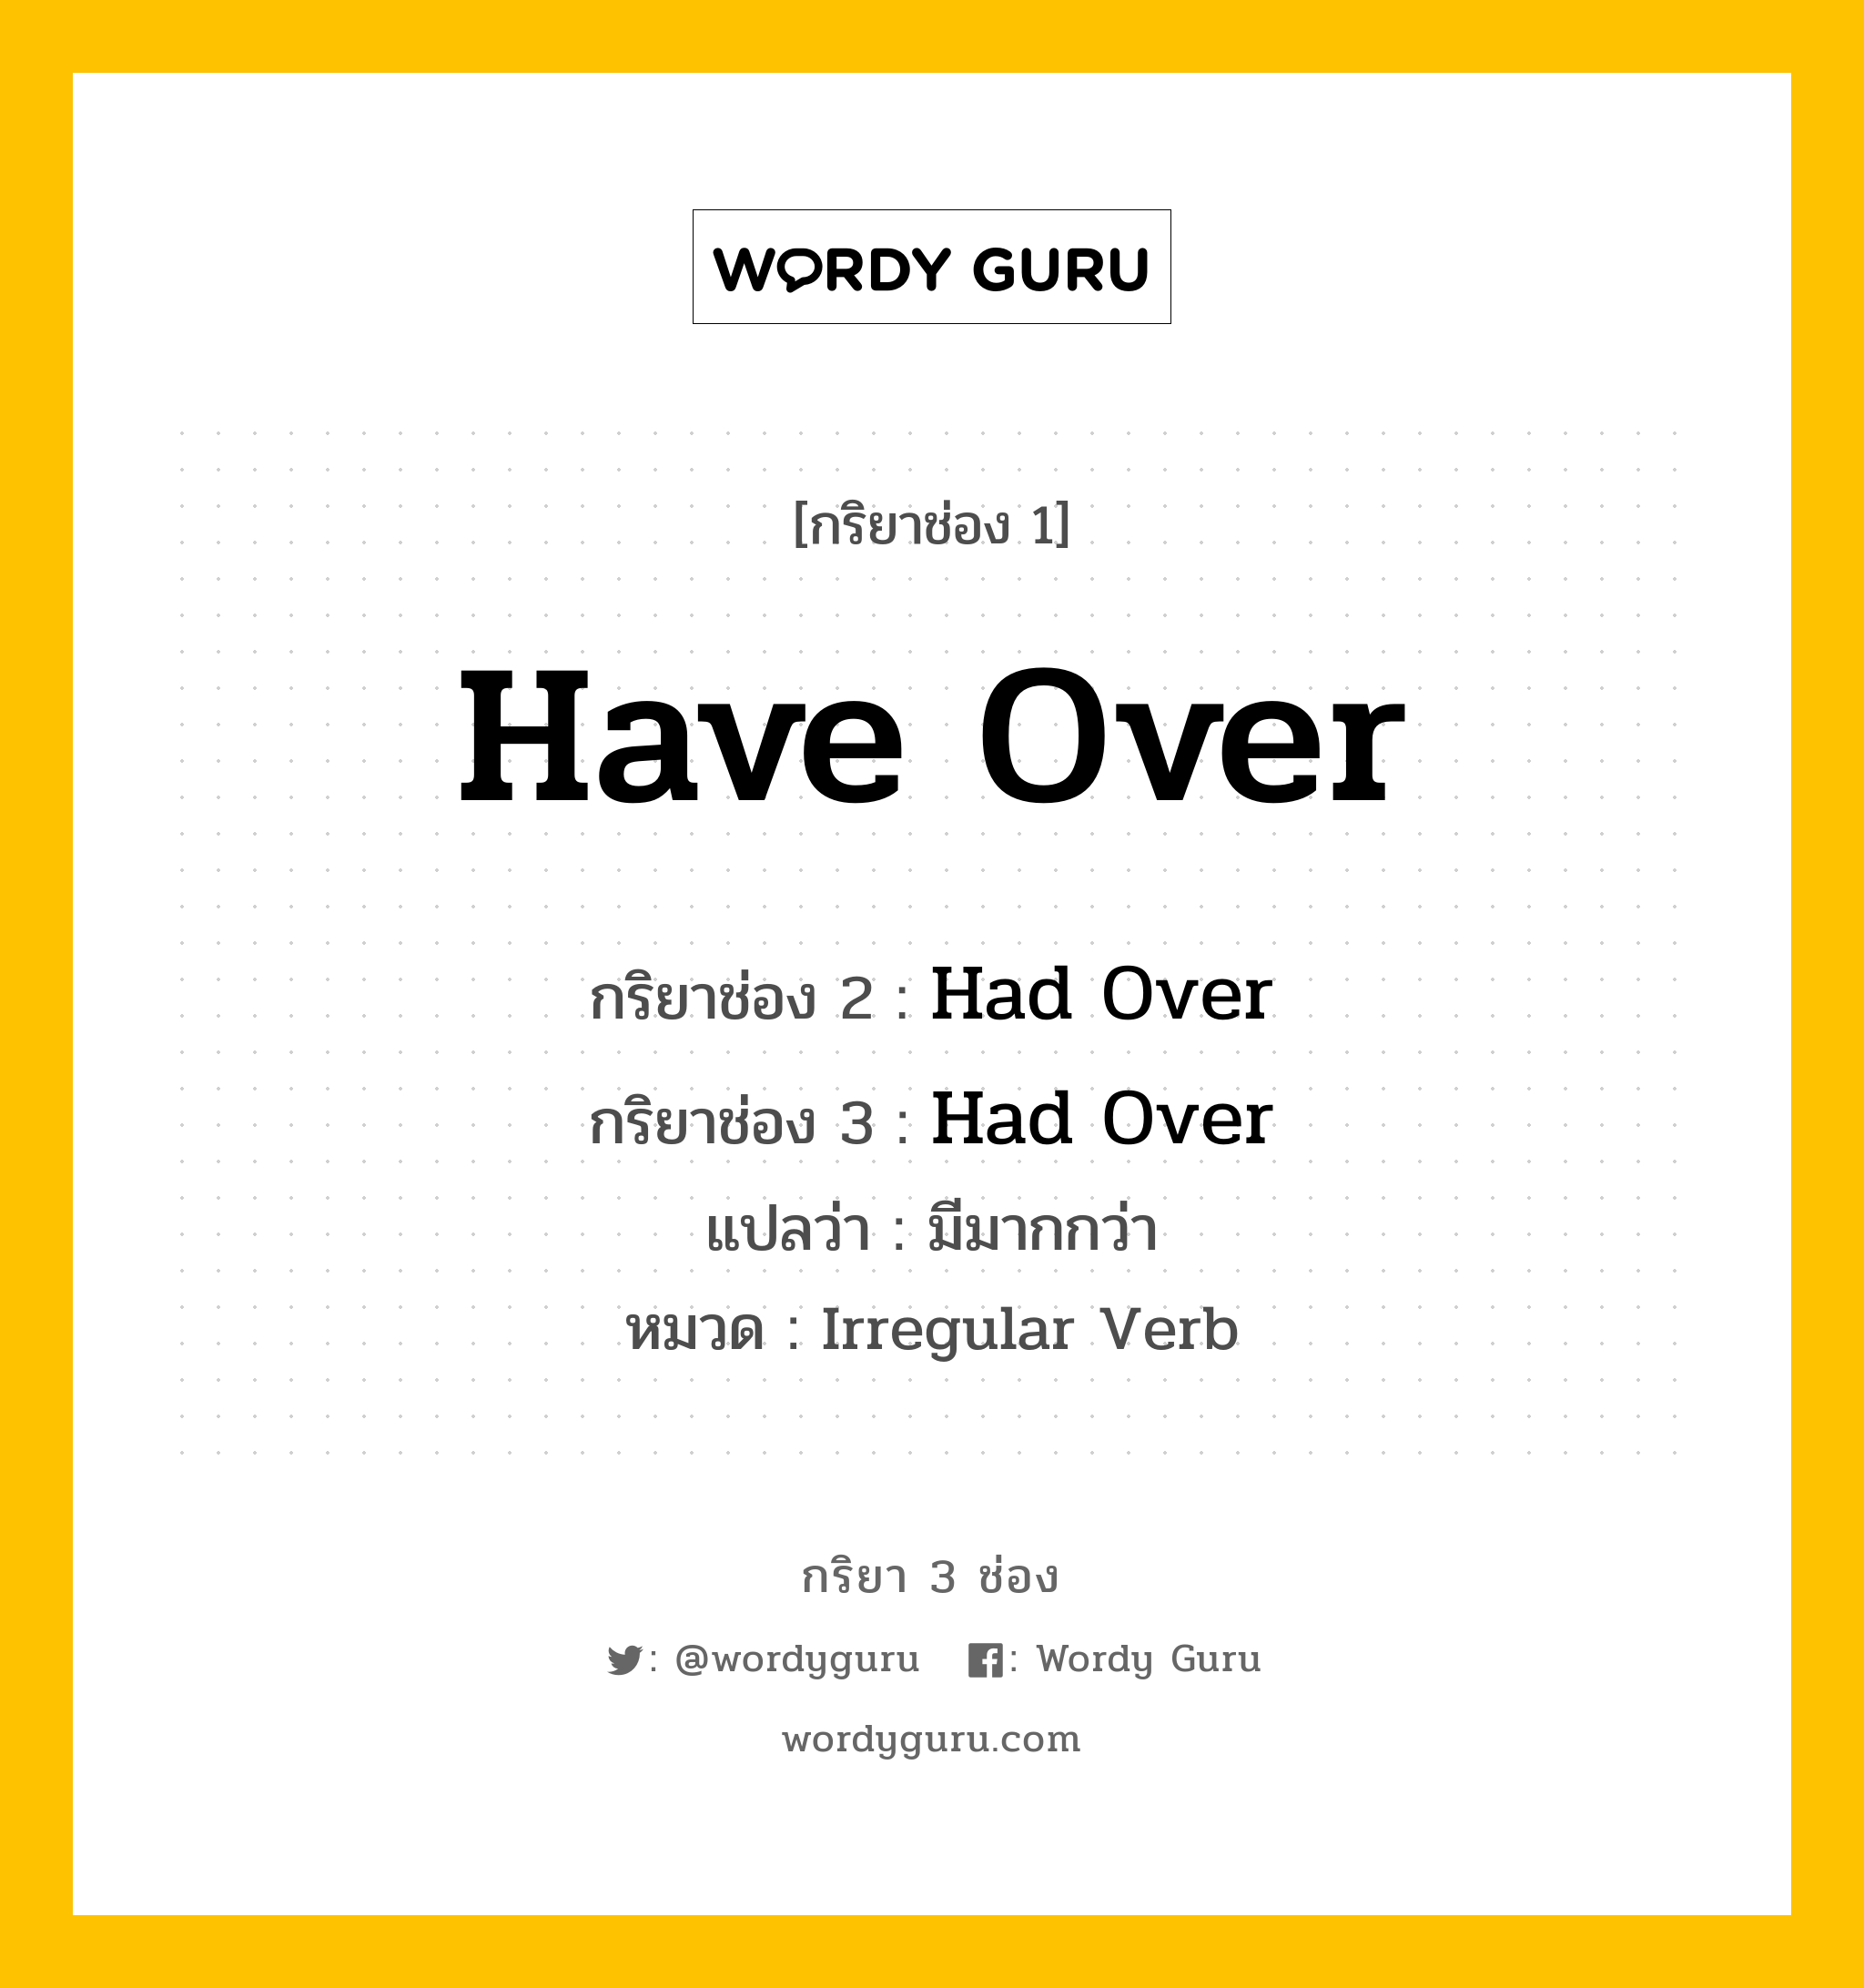 Have Over
